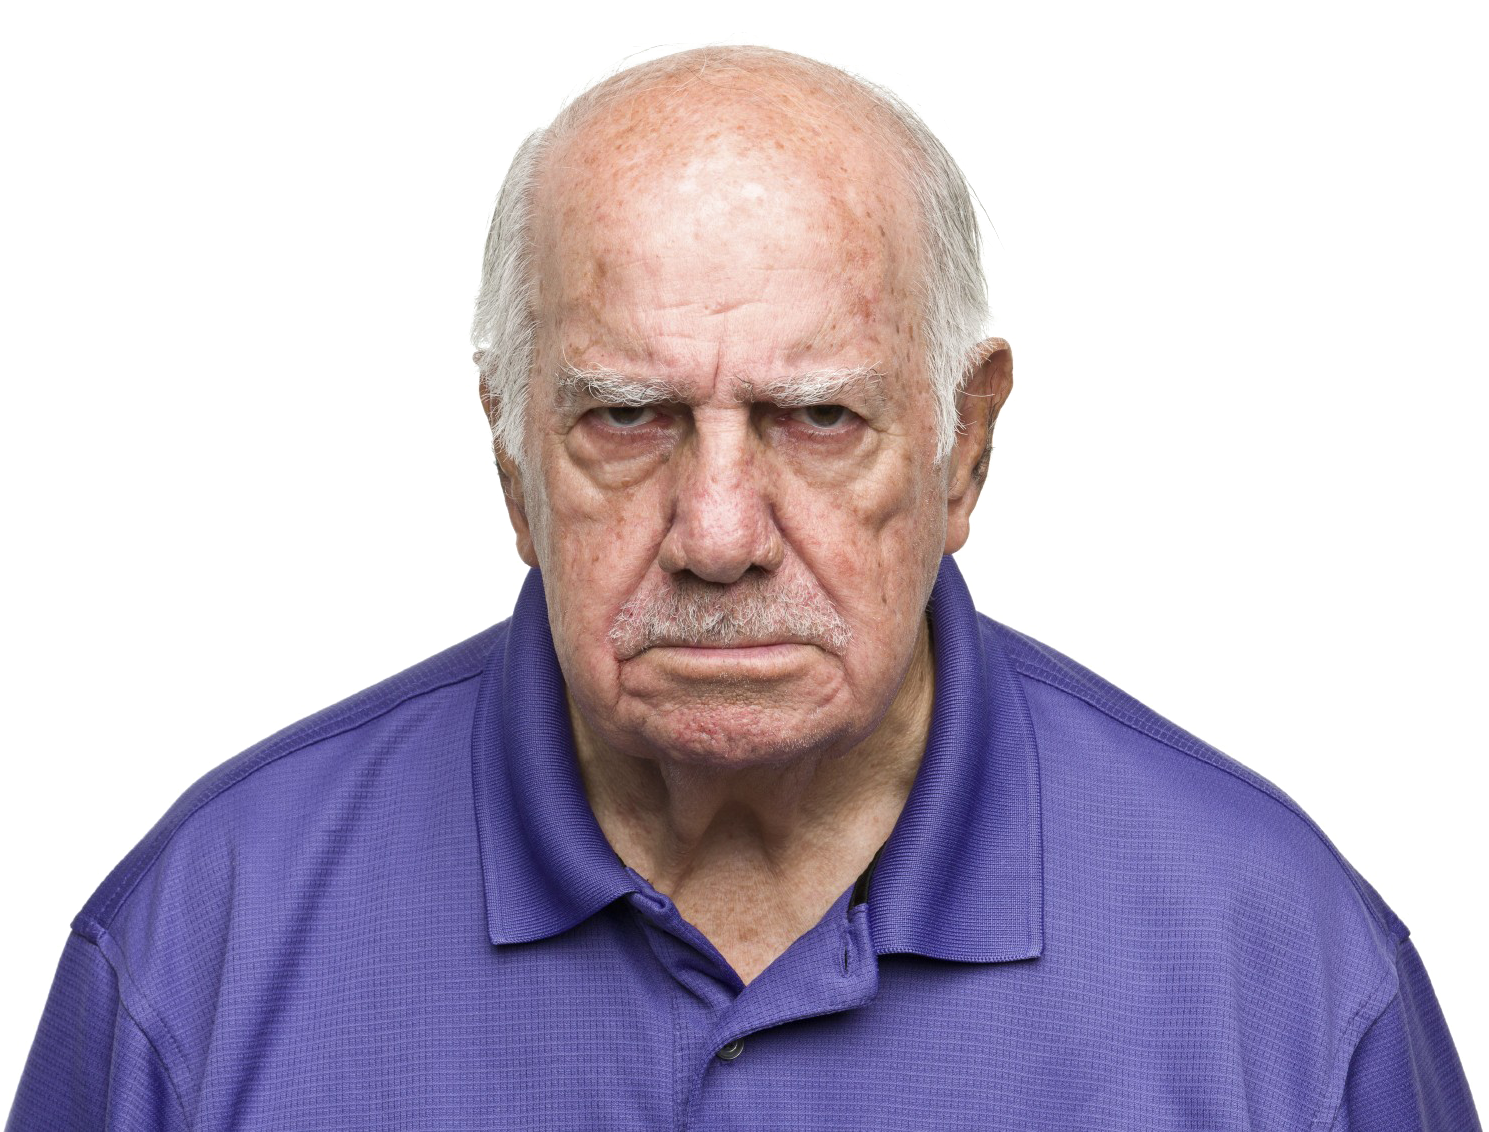 Angry Person PNG Image